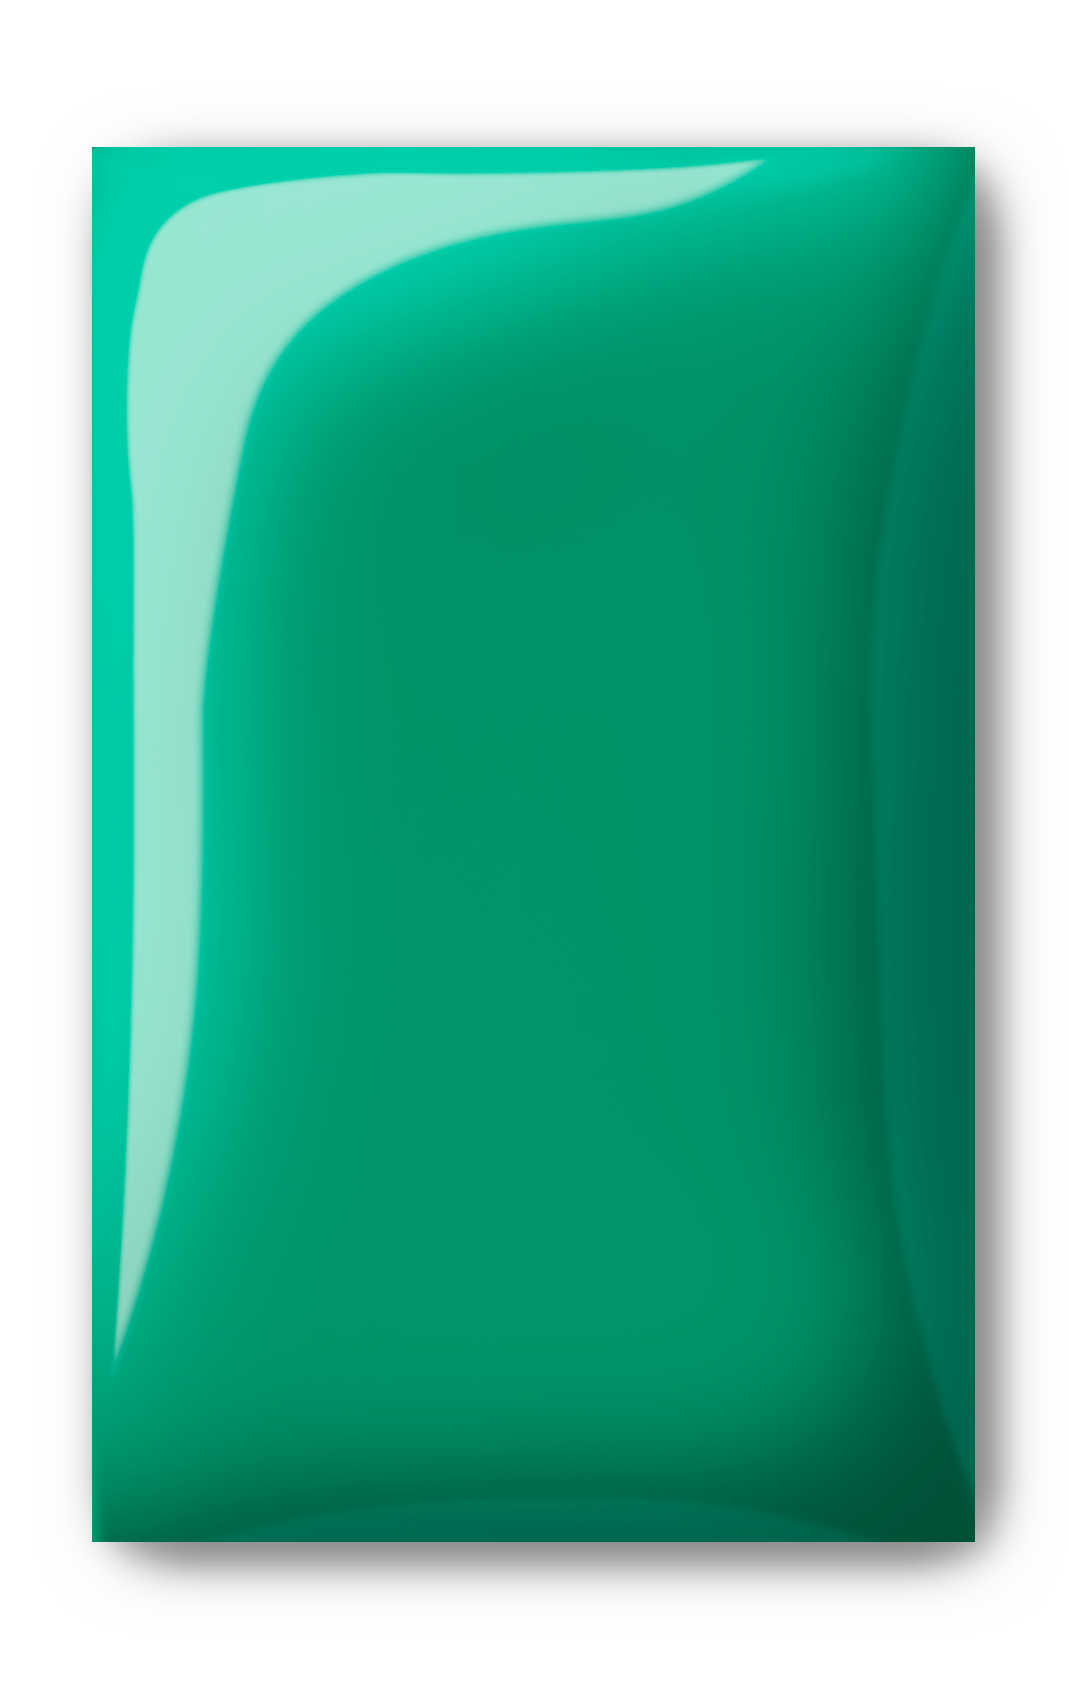 Light Elegance P+ Soak Off Color Gel - Night Terror Teal :: New Packaging - Creata Beauty - Professional Beauty Products